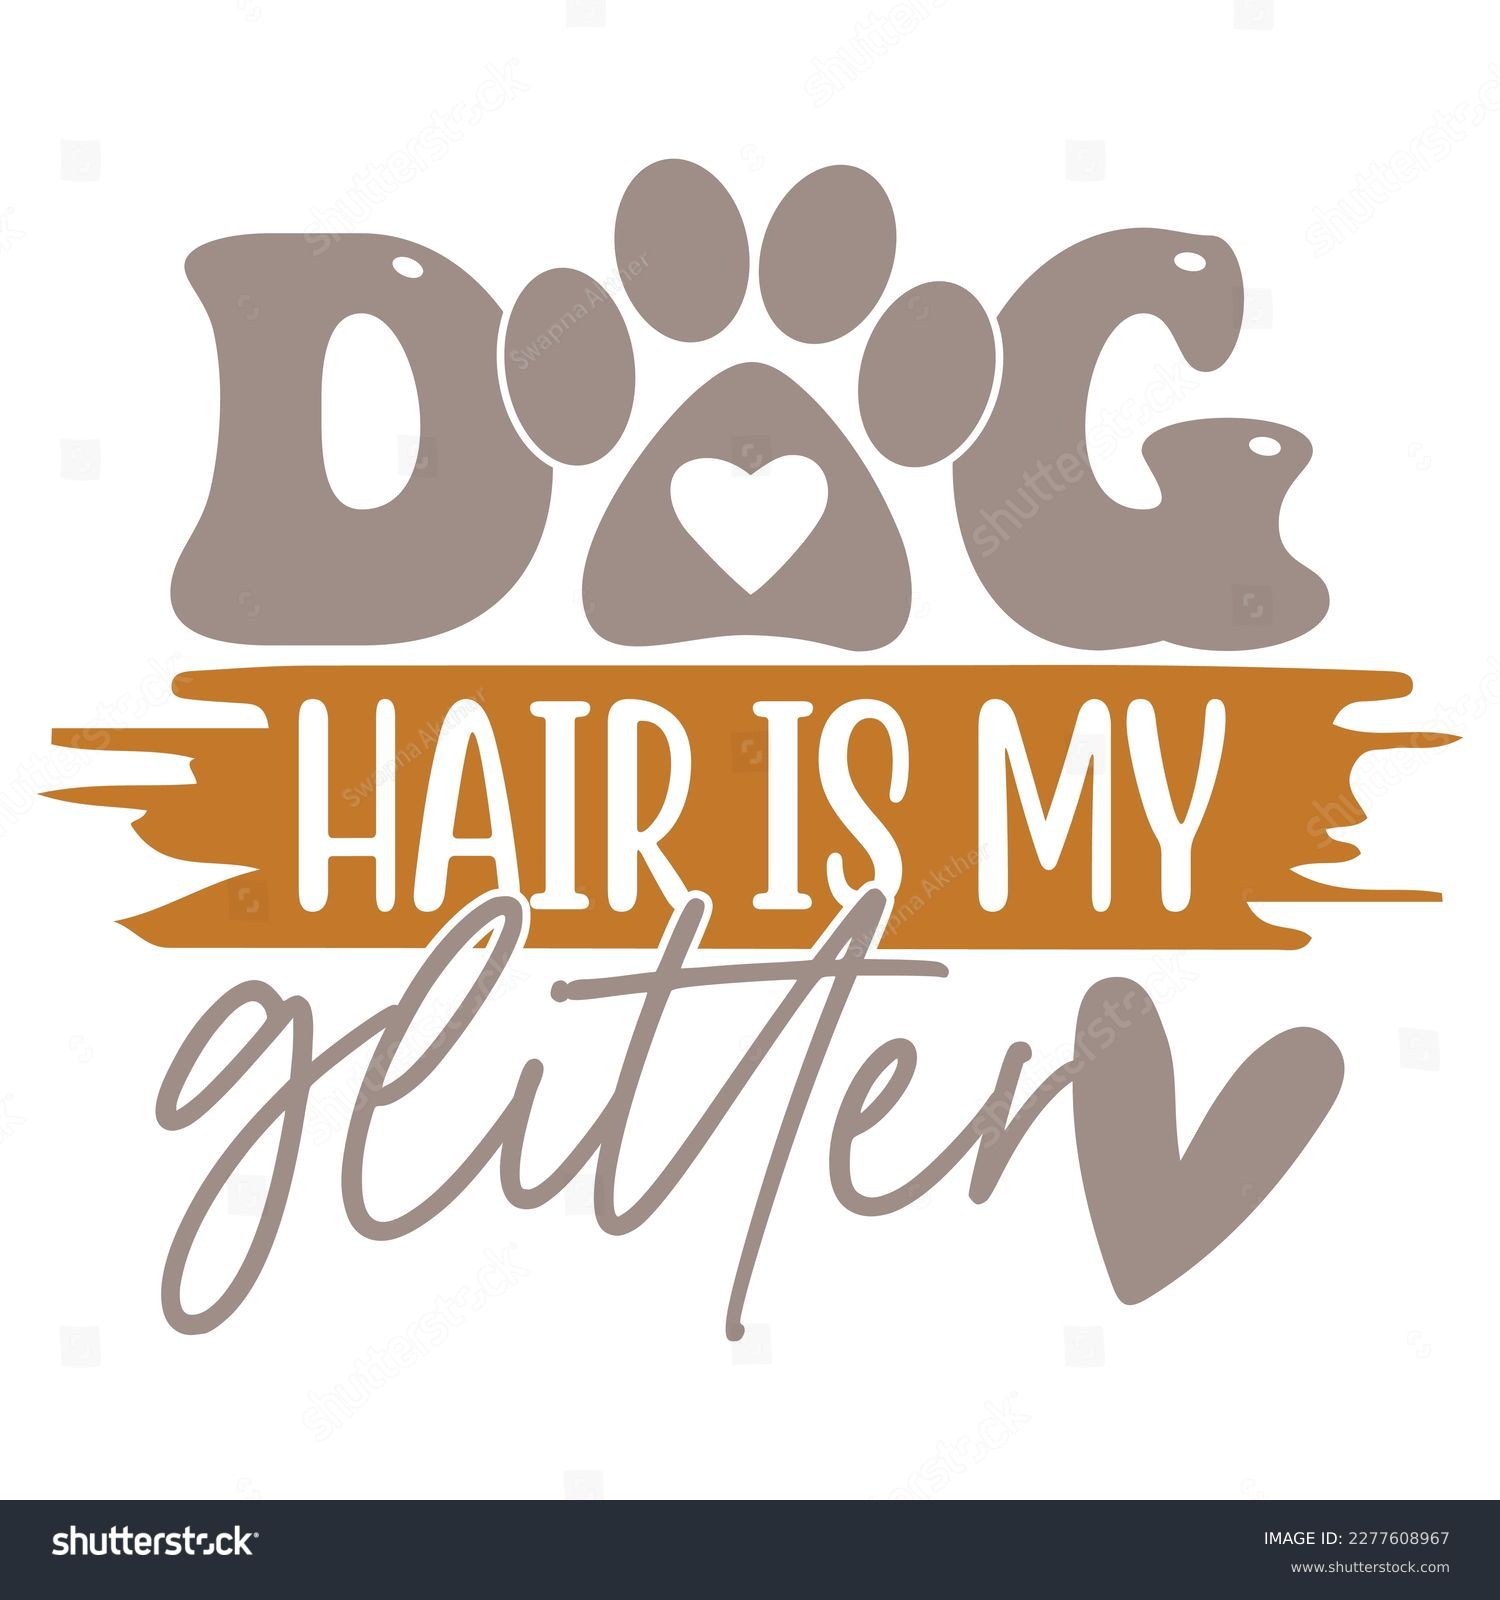 SVG of Dog Hair is My Glitter - Boho Retro Style Dog T-shirt And SVG Design. Dog SVG Quotes T shirt Design, Vector EPS Editable Files, Can You Download This File. svg